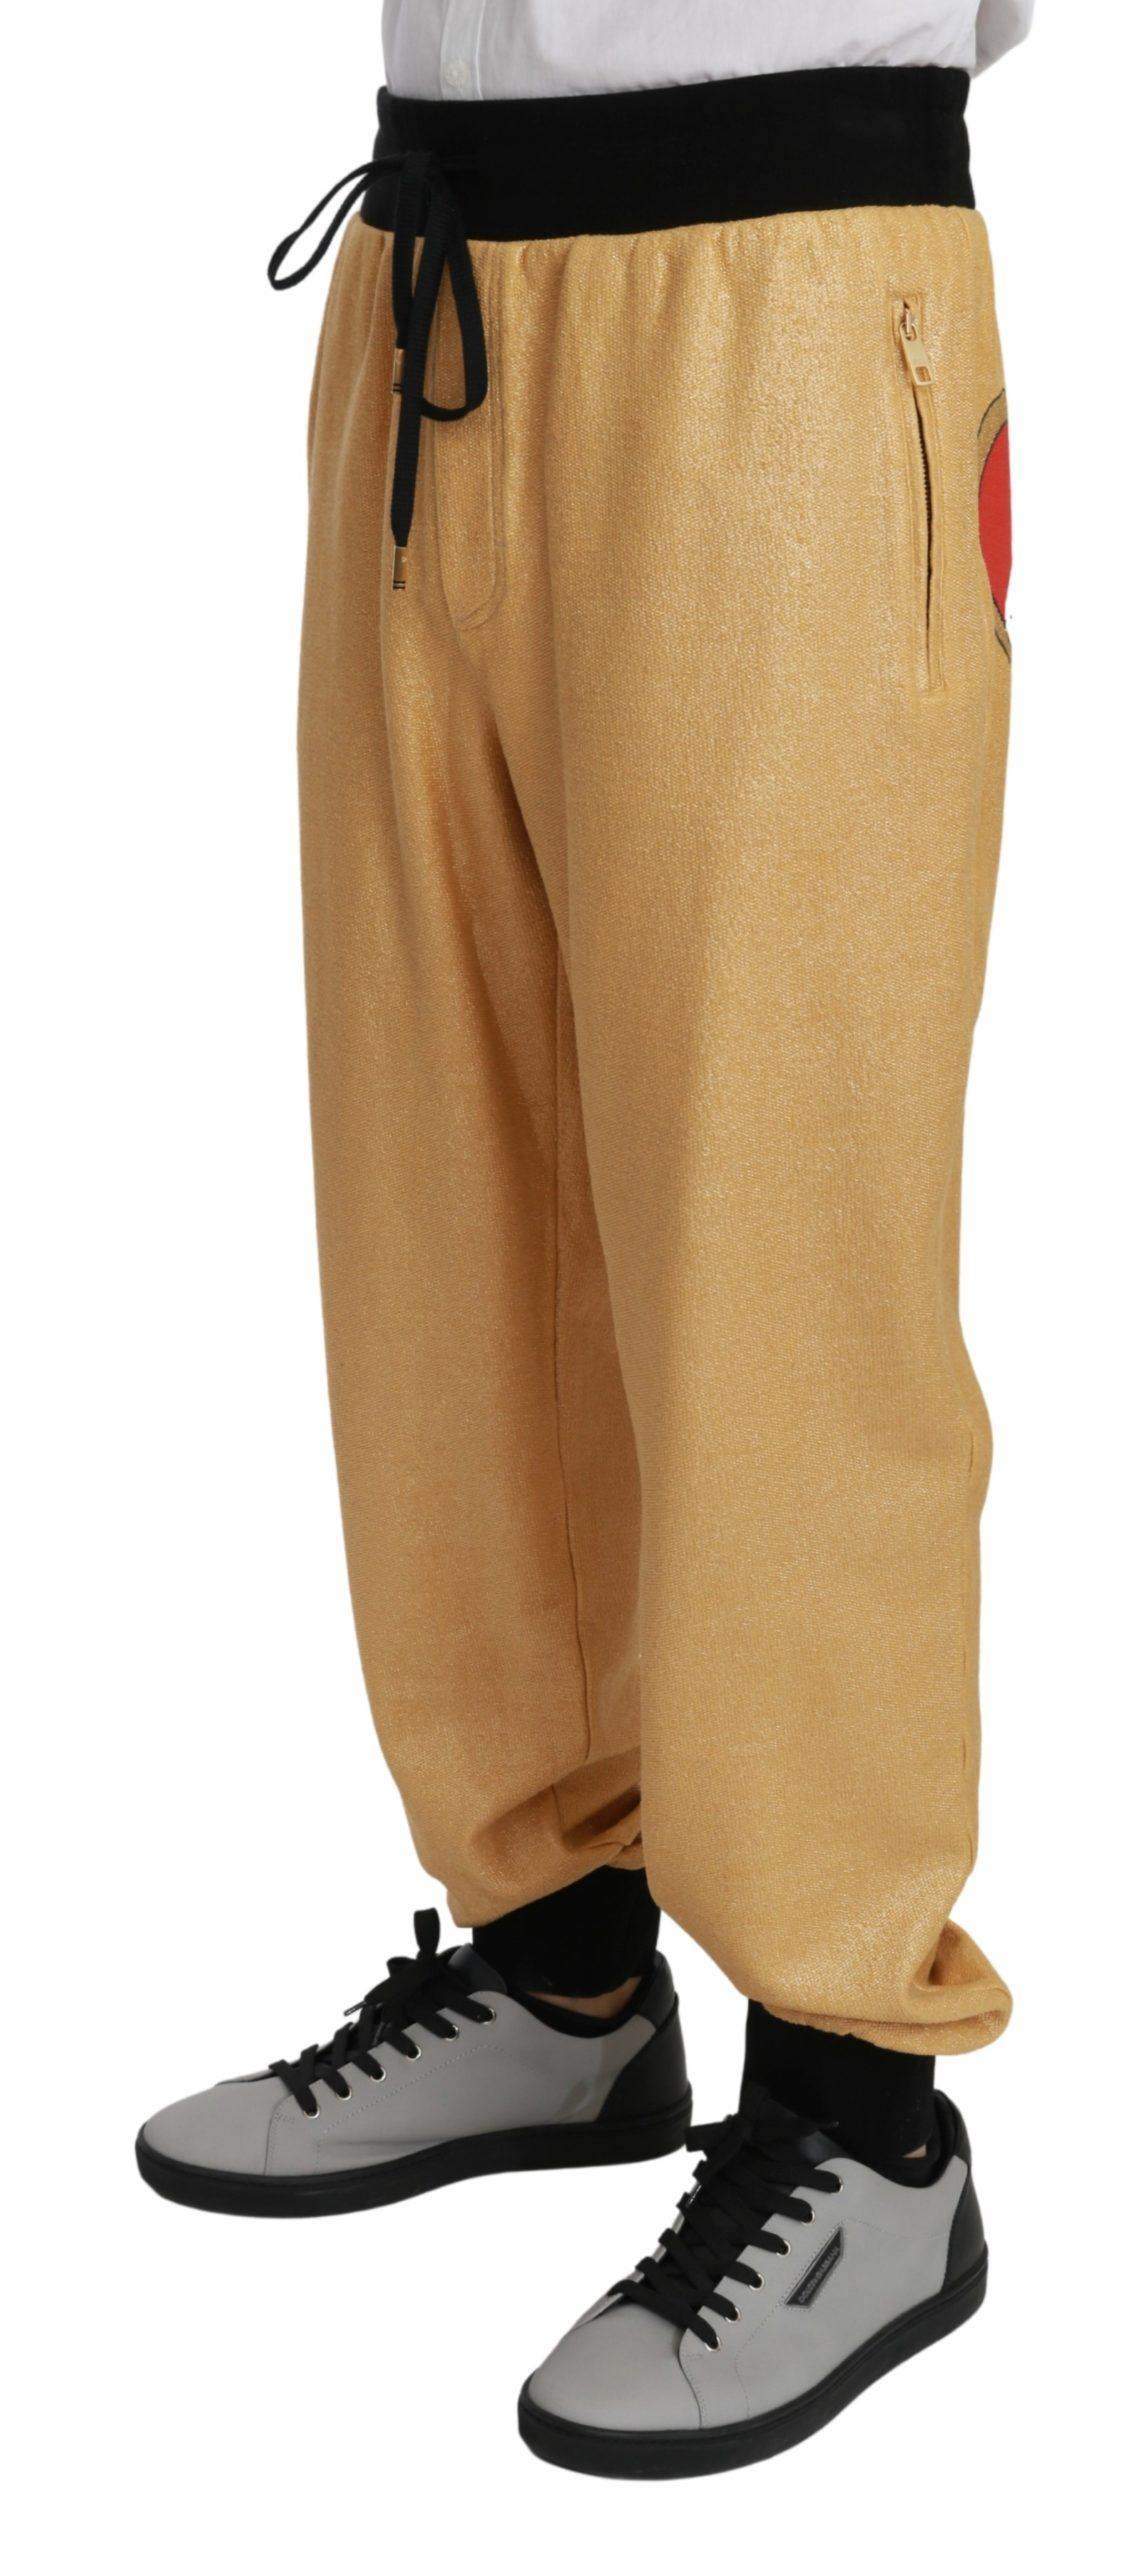 Dolce & Gabbana  Gold Year Of The Pig Cotton Mens Pants #men, Brand_Dolce & Gabbana, Catch, Dolce & Gabbana, feed-agegroup-adult, feed-color-gold, feed-gender-male, feed-size-IT52 | XL, feed-size-IT56 | XXL, Gender_Men, Gold, IT52 | XL, IT56 | XXL, Jeans & Pants - Men - Clothing, Kogan, Men - New Arrivals at SEYMAYKA